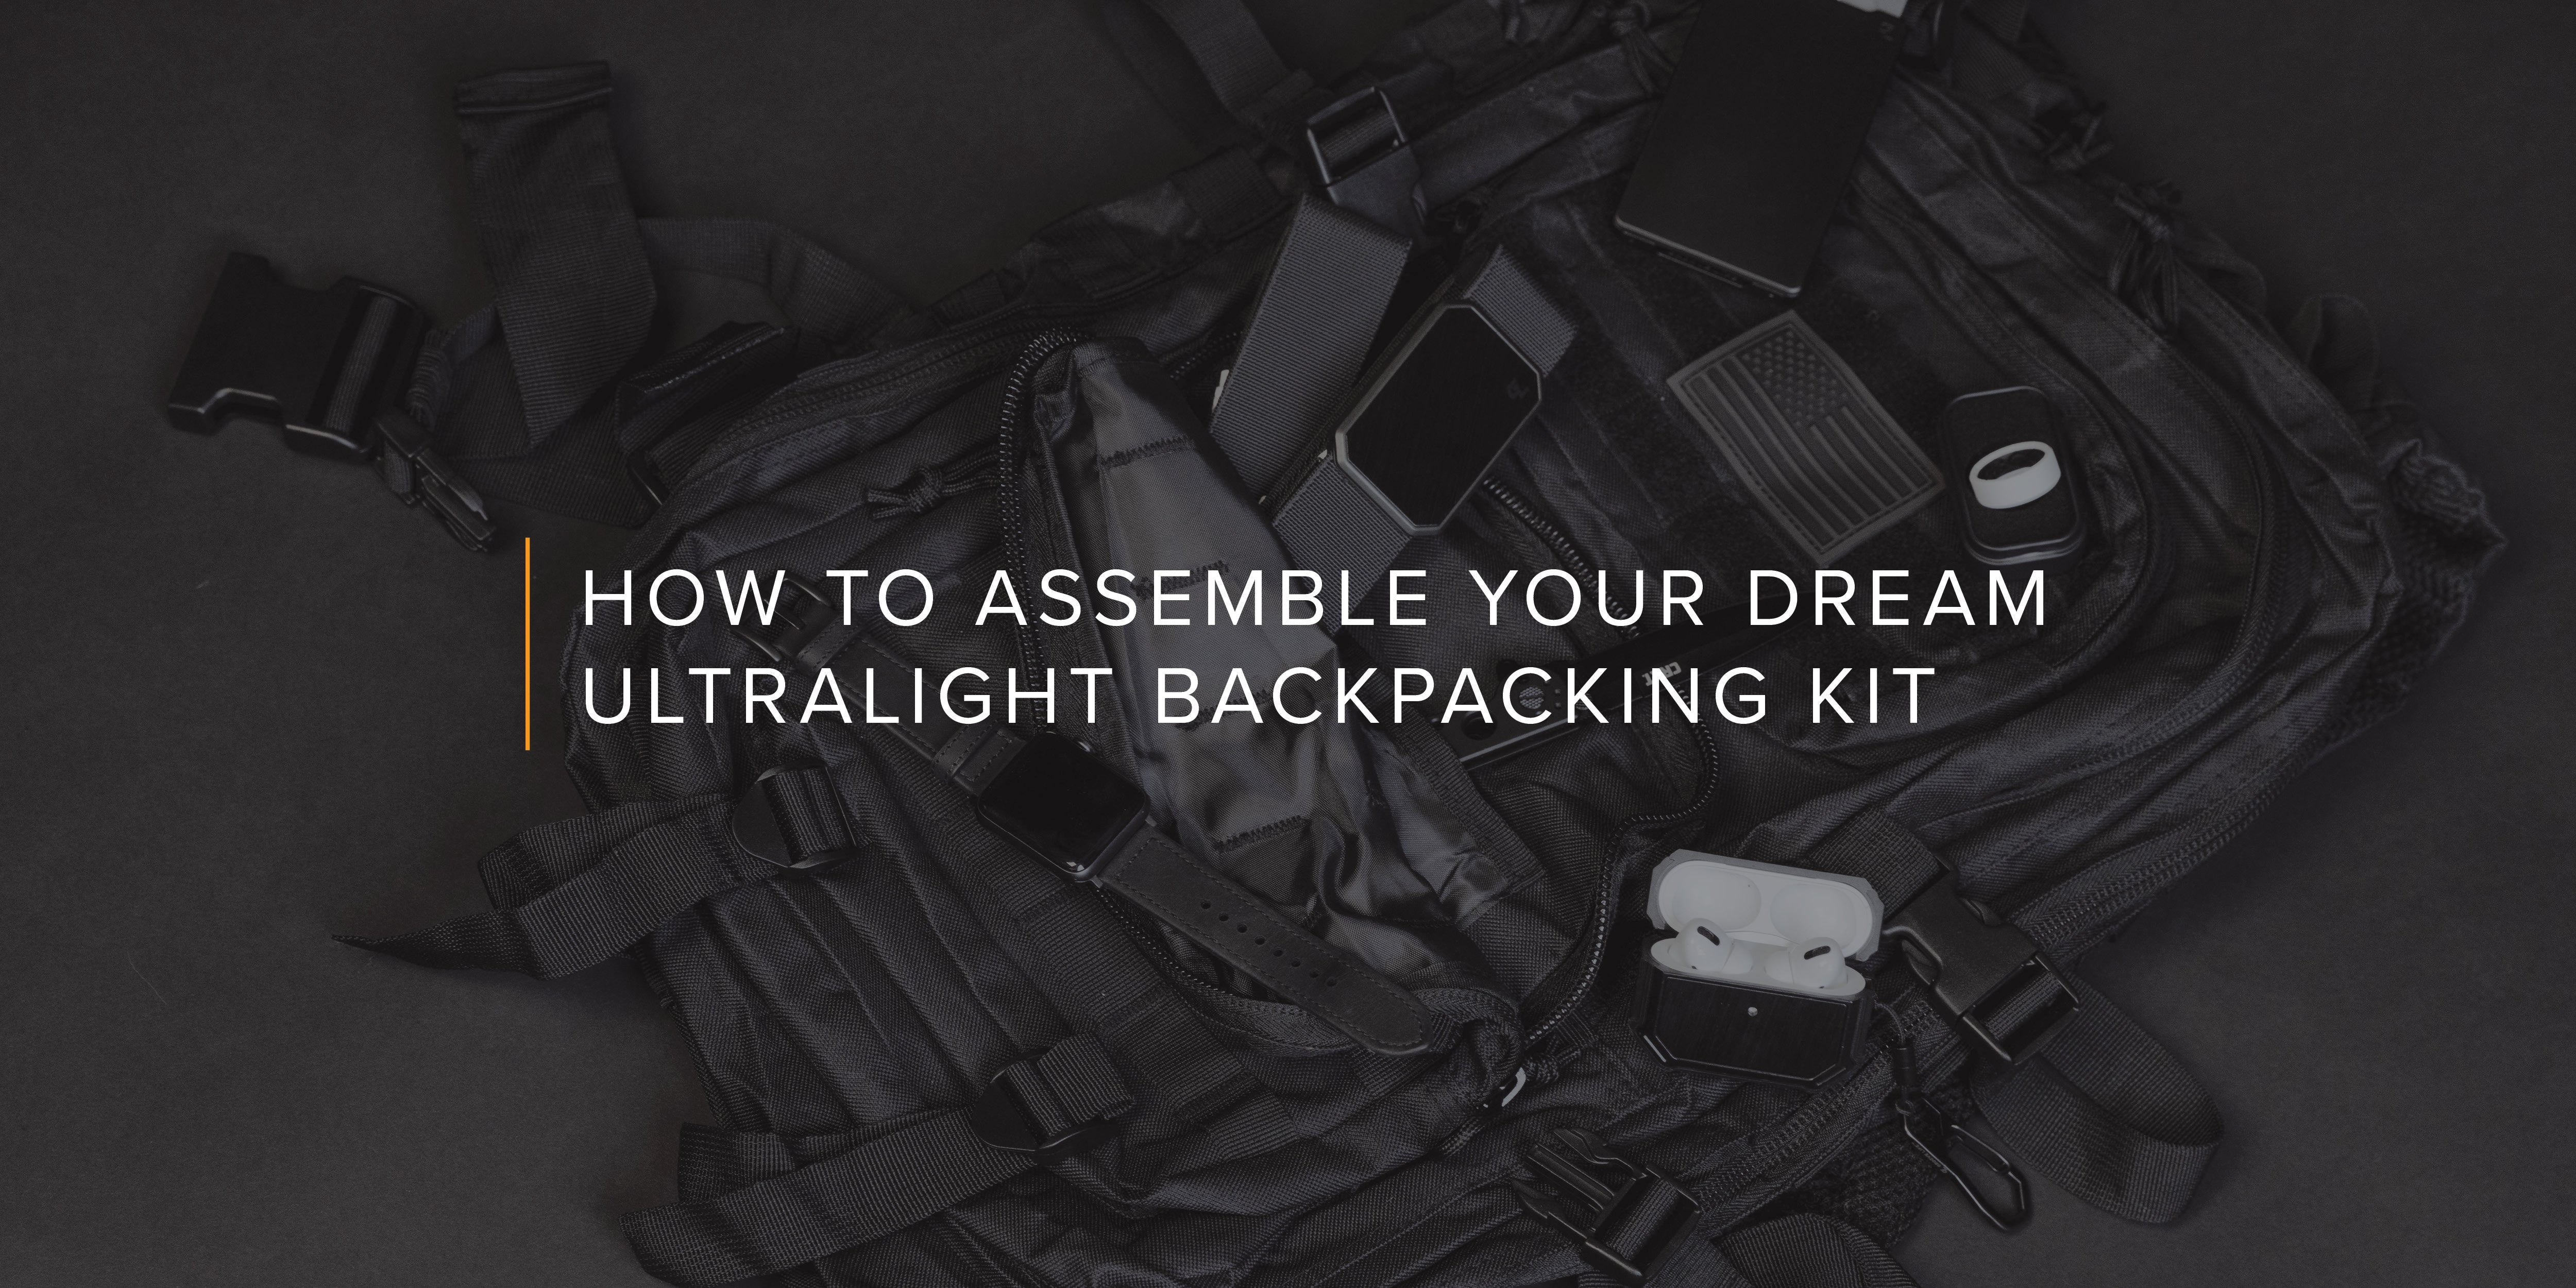 How to Assemble Your Dream Ultralight Backpacking Kit